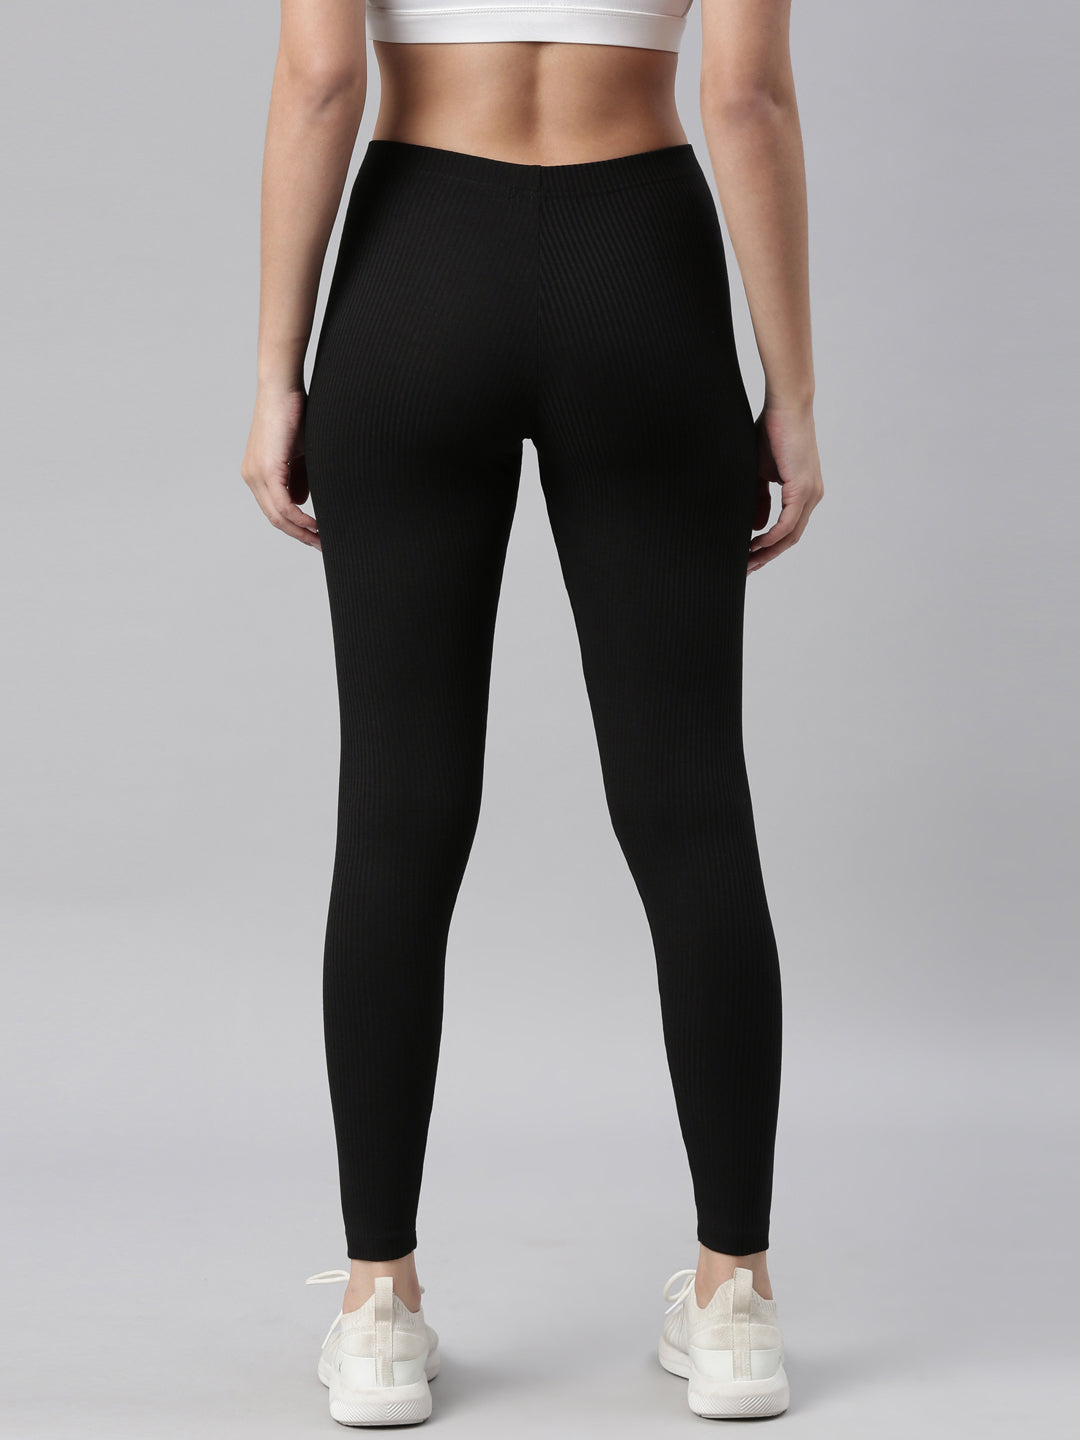 Tights - Buy Tights Online for Women at Best Prices in India - Flipkart.com